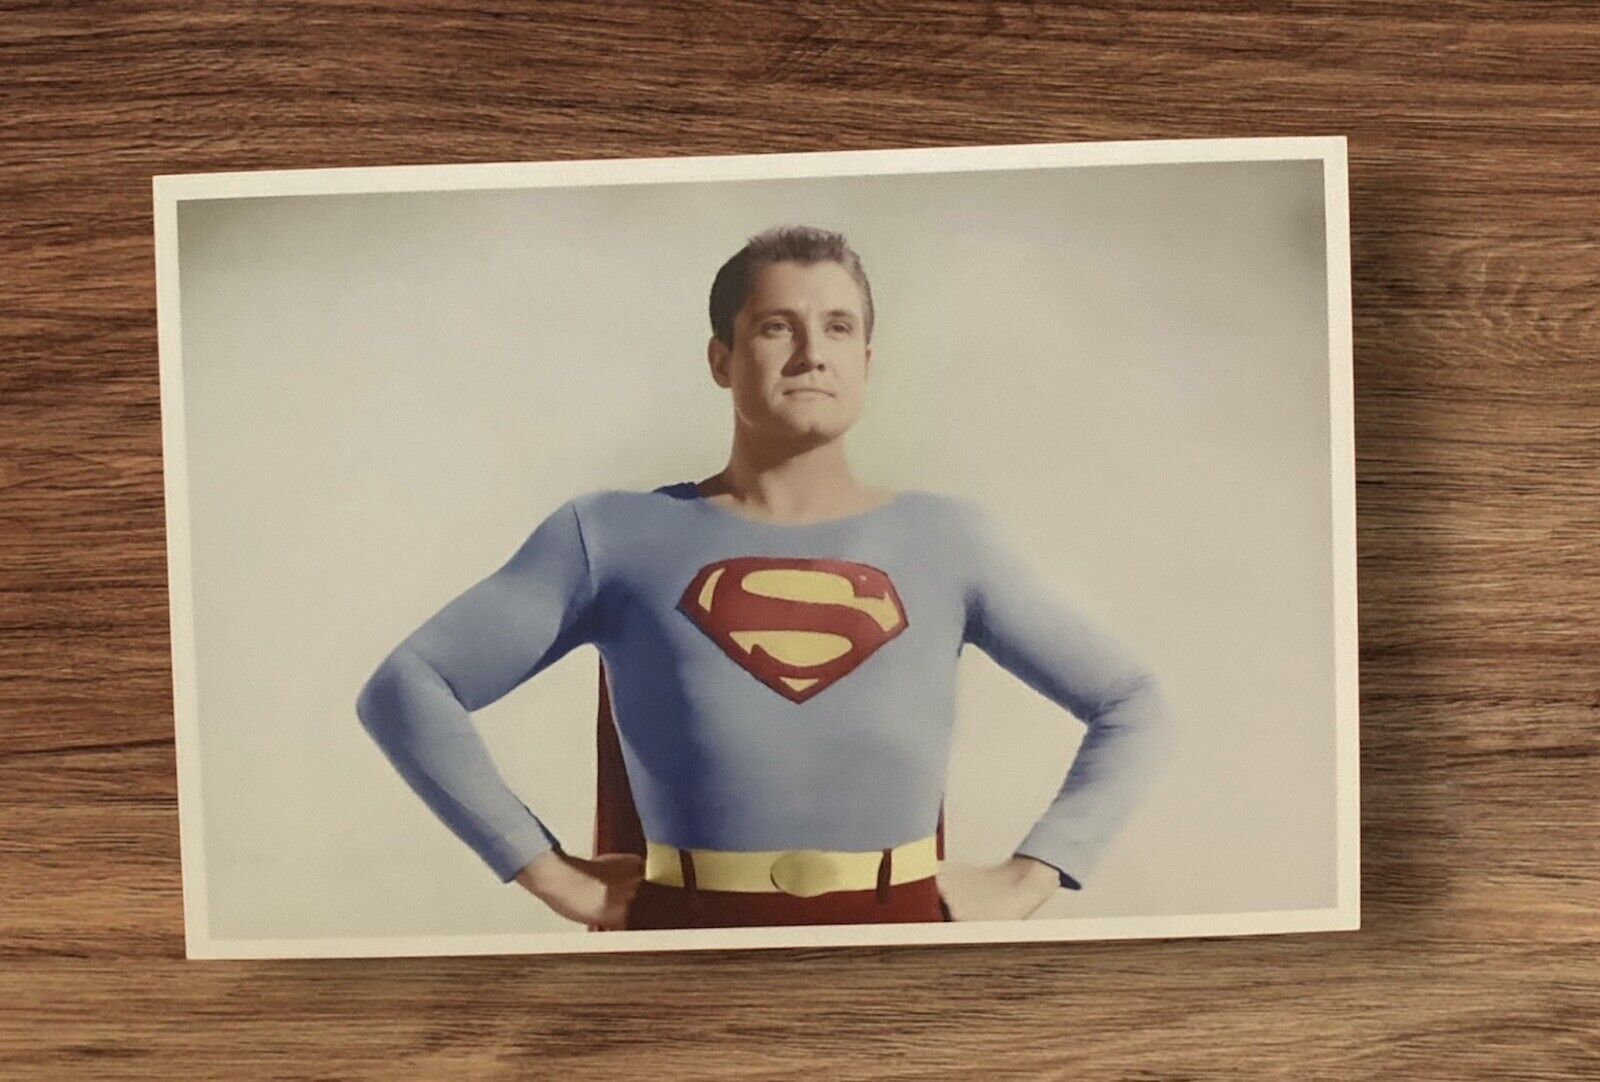 George Reeves as Superman Classic TV Show Publicity 4x6 Photo